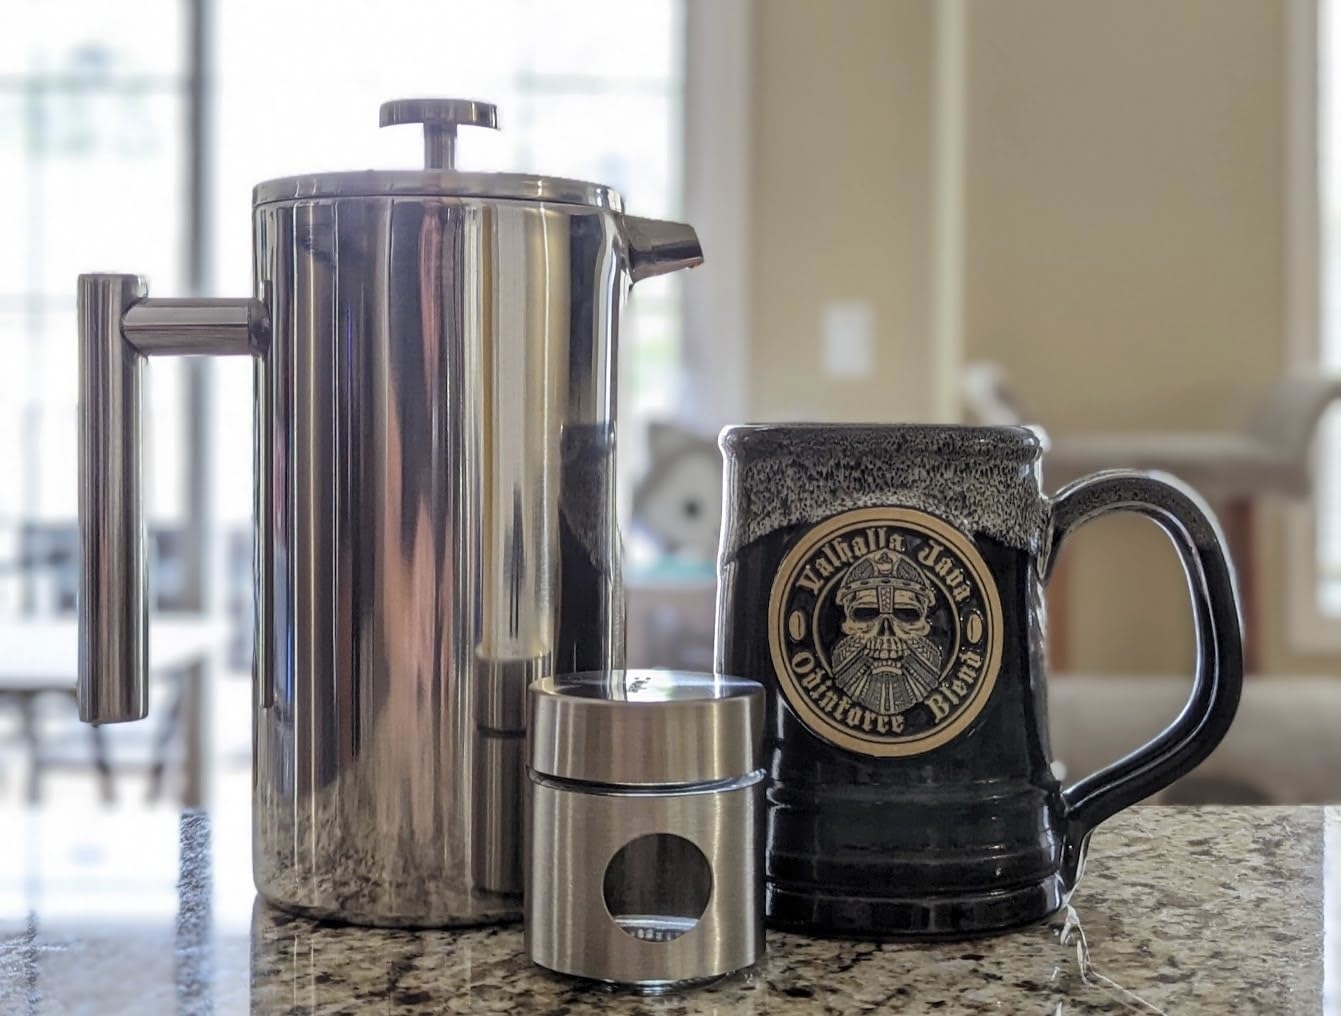 Stainless steel French press with matching container next to a ceramic mug with intricate design